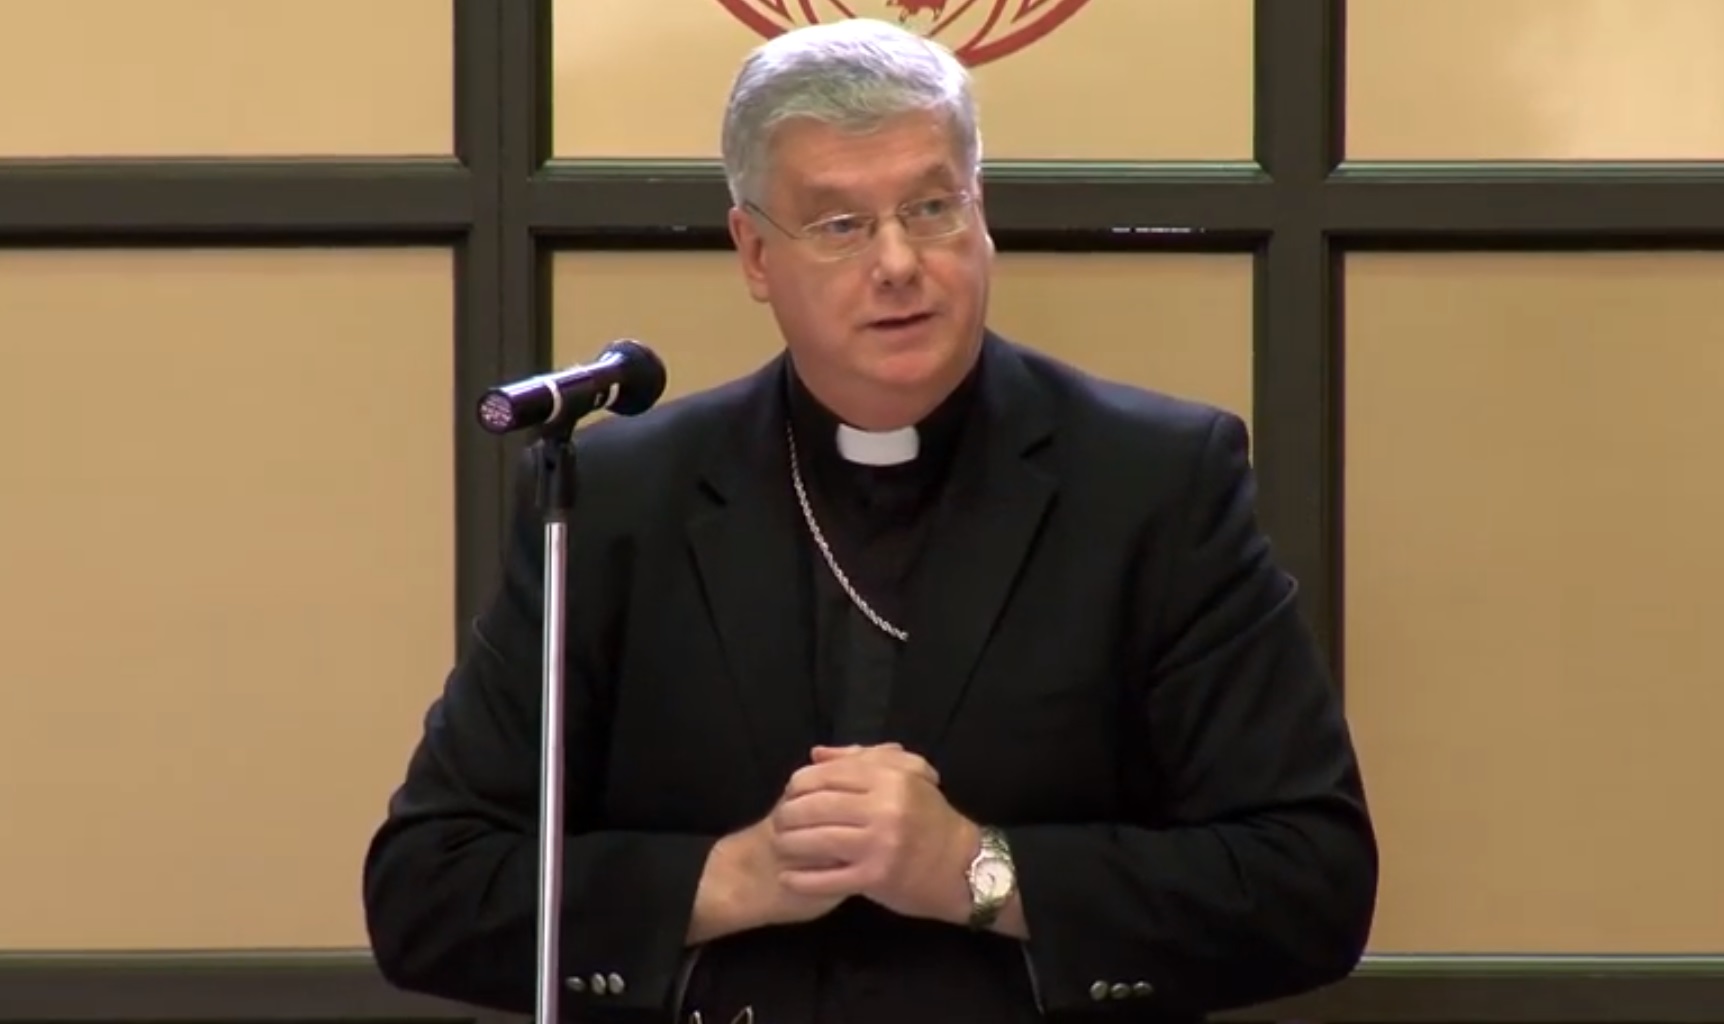 Auxiliary Bishop Gerard Battersby directed the LGBT+ group Fortunate Families to disband